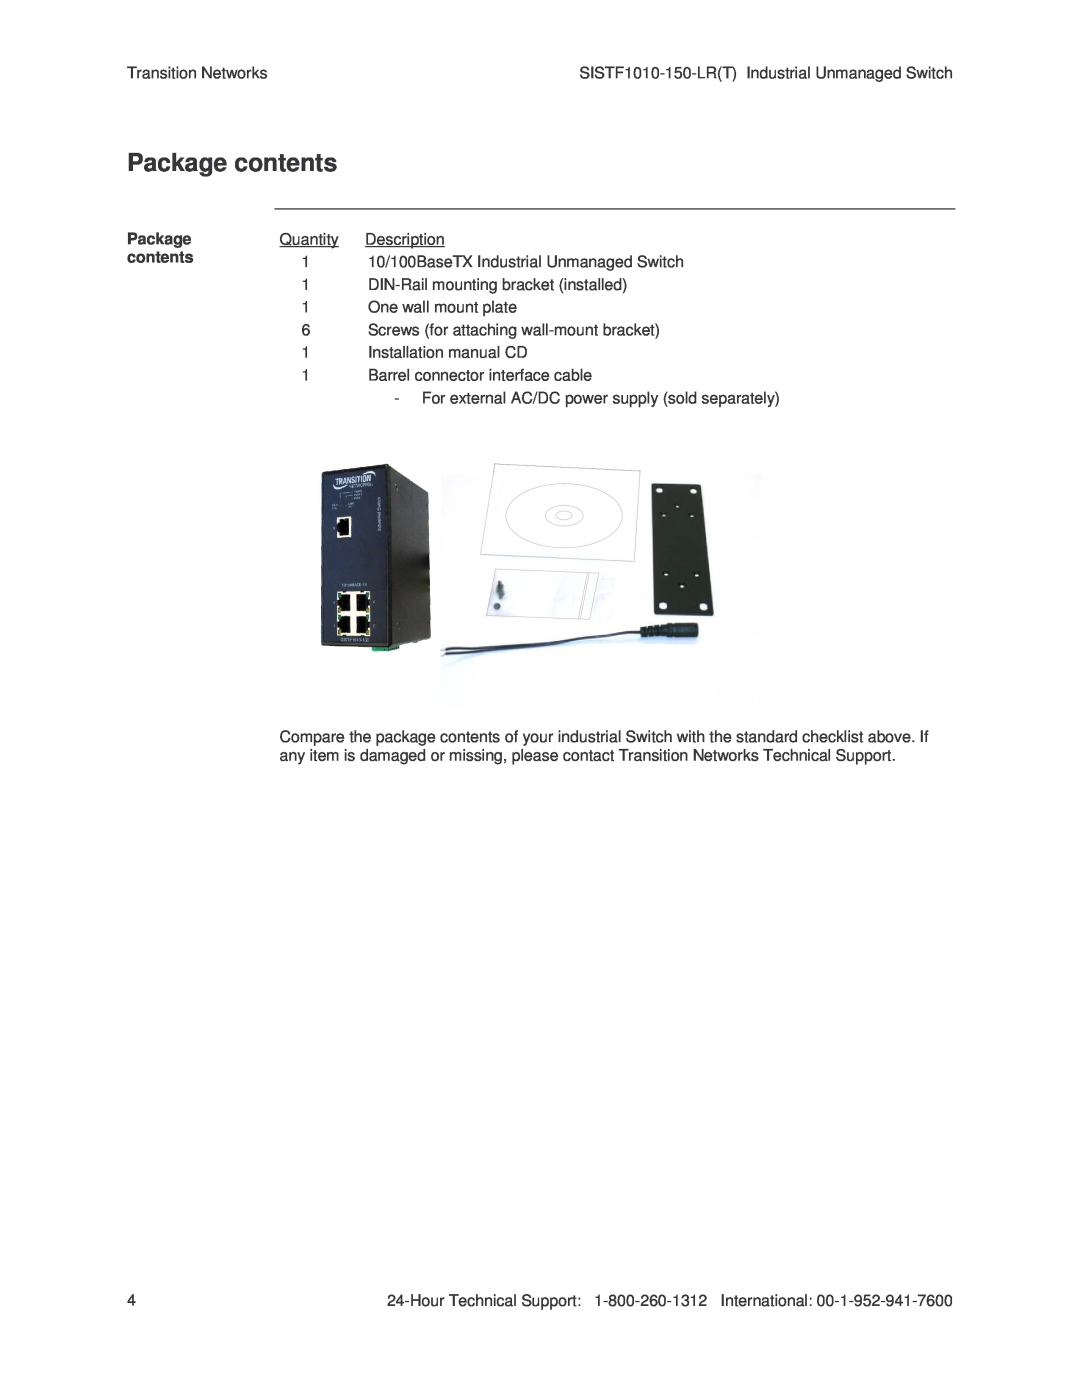 Transition Networks SISTF1010-150-LR(T) installation manual Package contents 